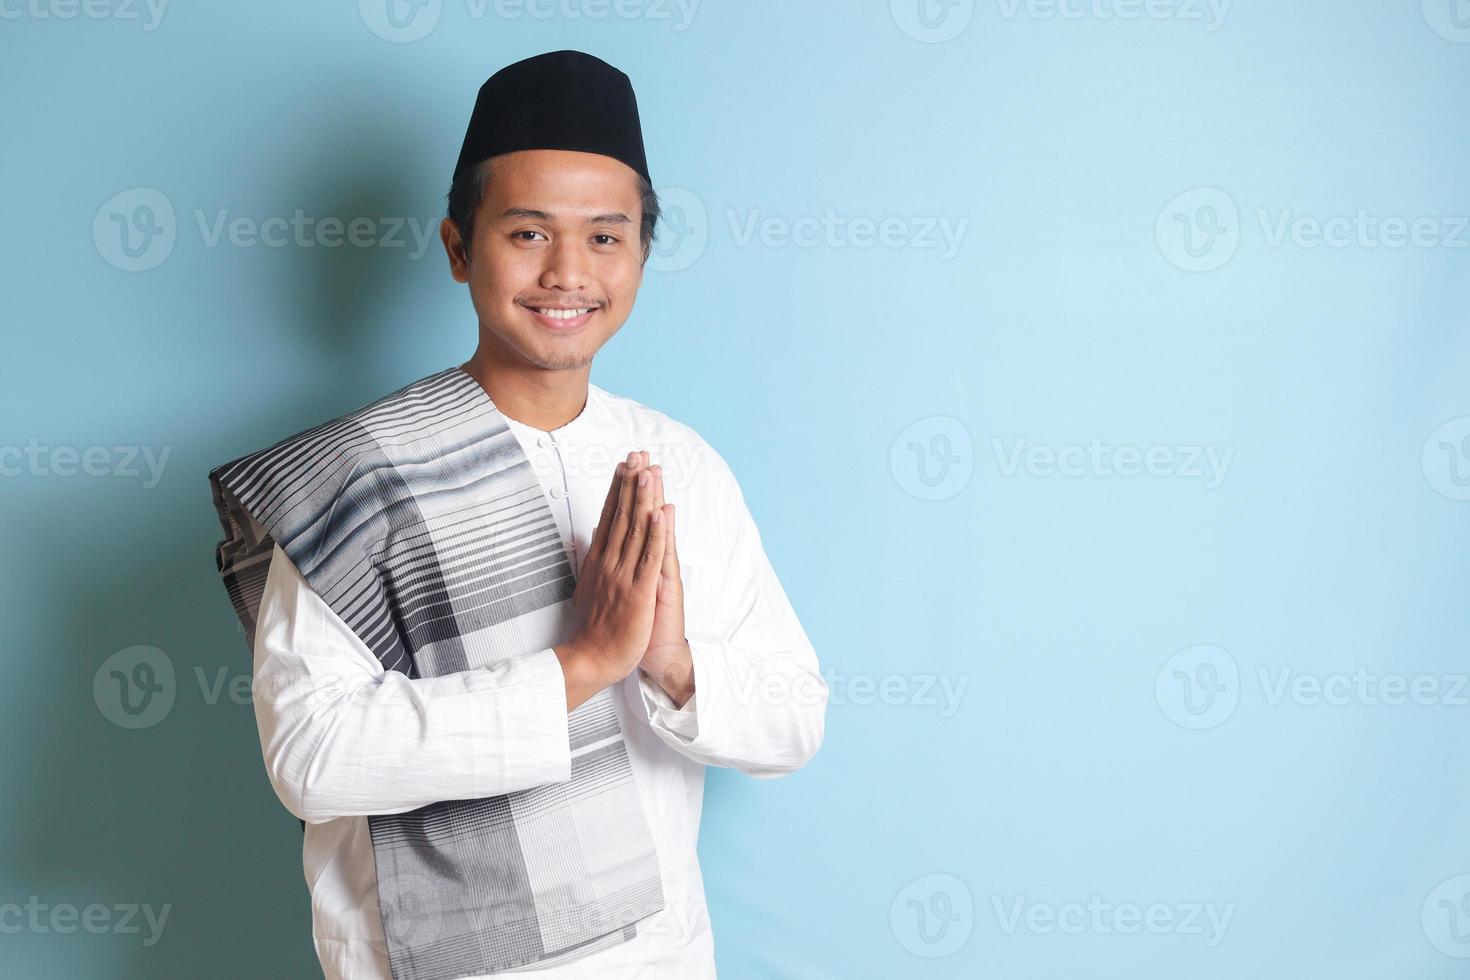 Portrait of Asian muslim man in white koko shirt with skullcap showing apologize and welcome hand gesture. Isolated image on blue background photo